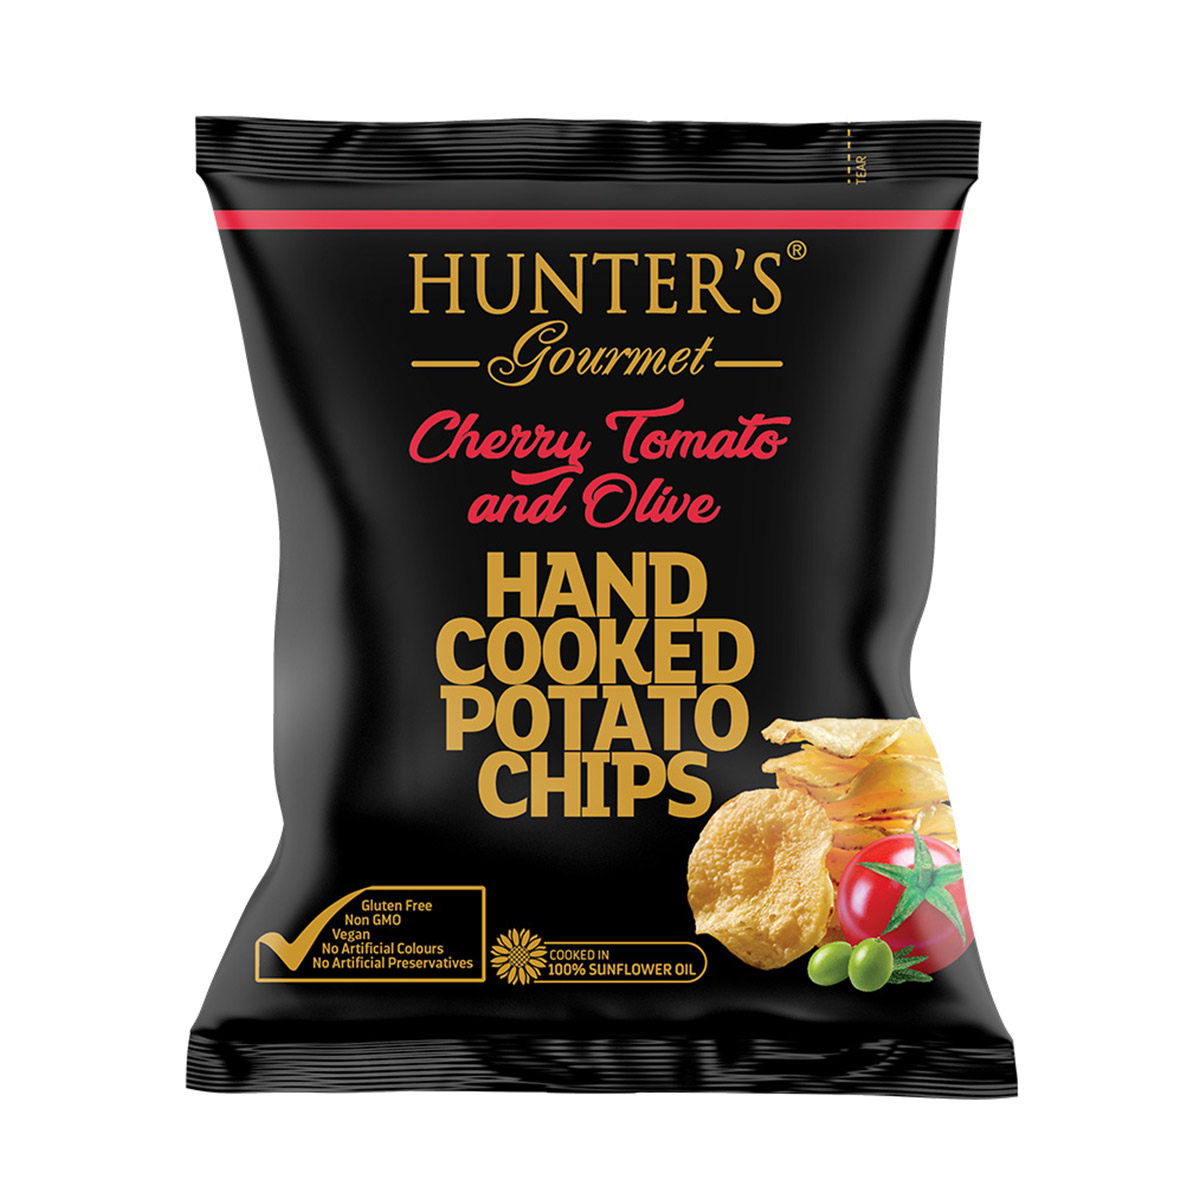 Hunter’s Gourmet Hand Cooked Potato Chips – Cherry Tomato and Olive – Gold Edition (150gm)